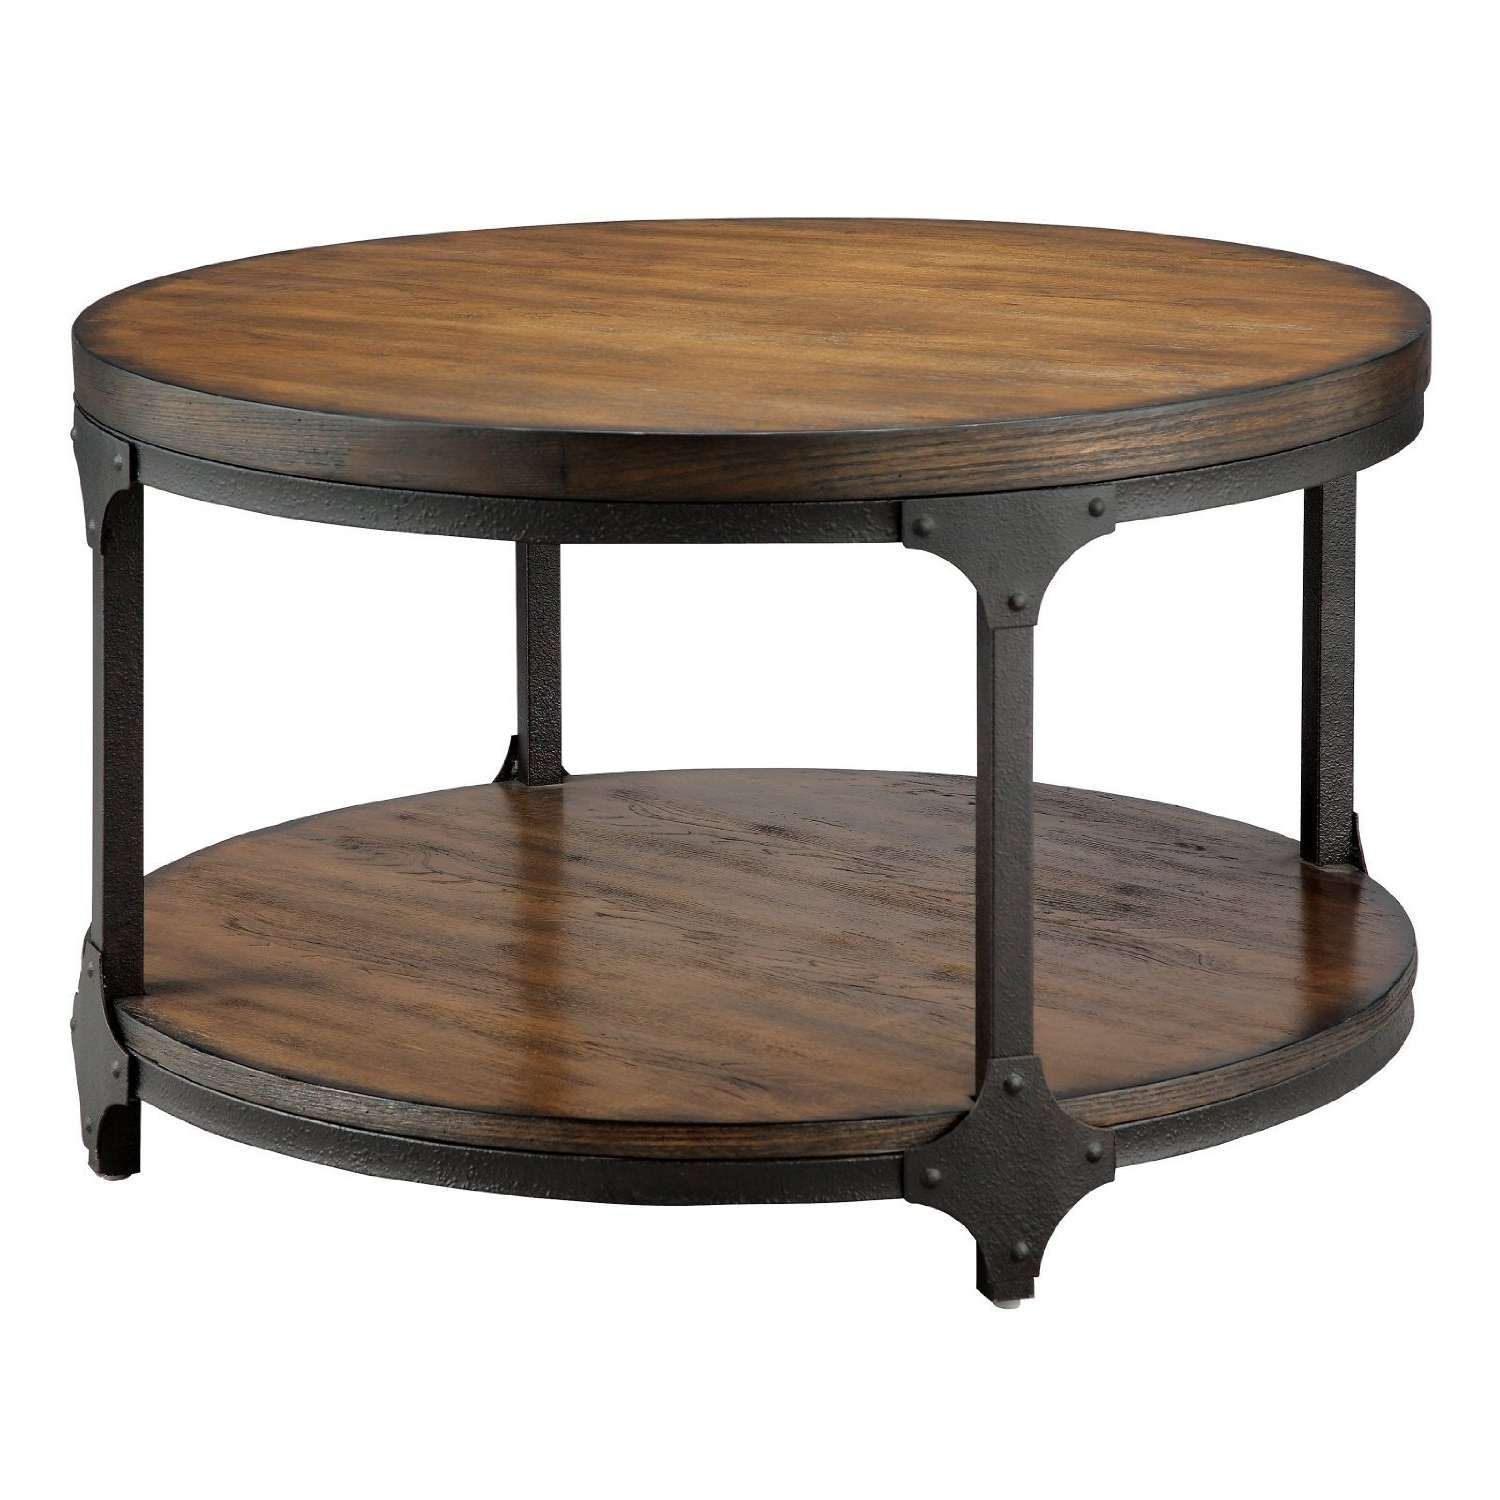 Fashionable Small Circle Coffee Tables Inside Old And Vintage Round Coffee Table With Black Metal Base And (View 6 of 20)